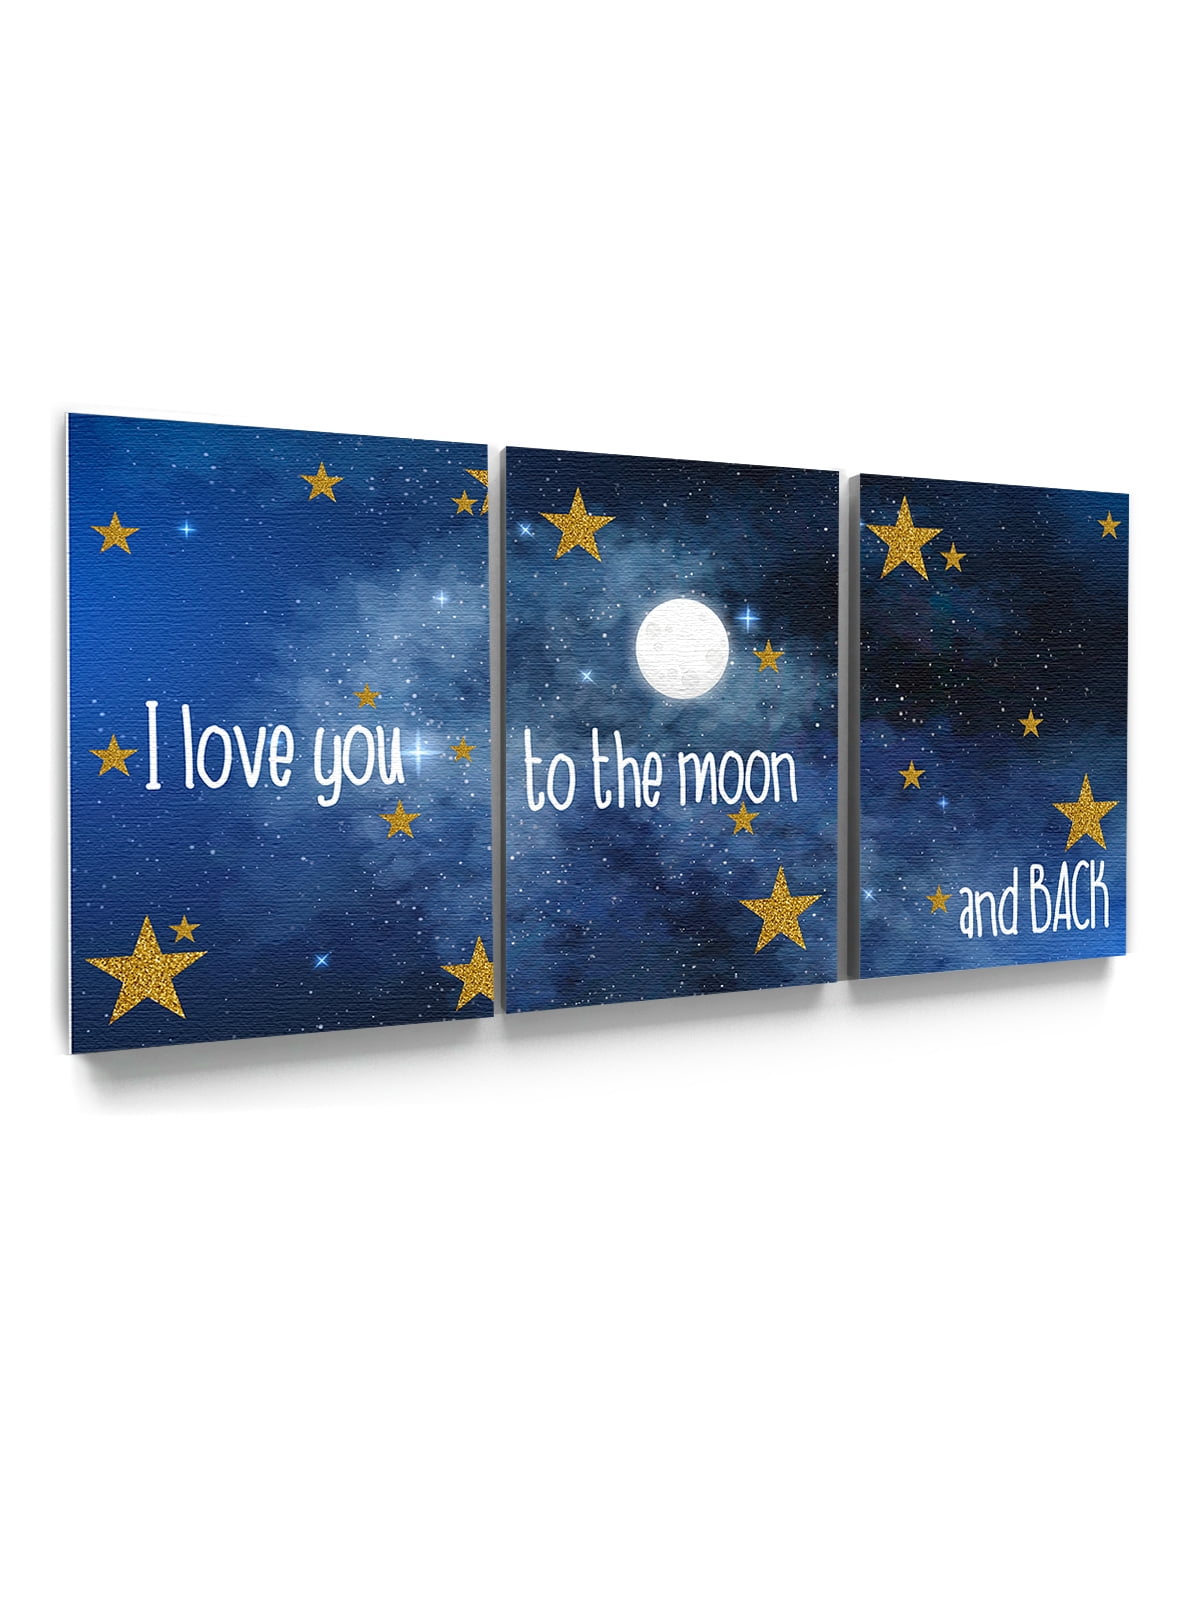 Awkward Styles Love You To The Moon And Back Canvas Baby Girl Room Boys Play Room Decor Mother Quotes Canvas Set Of 3 Inspirational Art Newborn Baby Room Wall Decor Love Wallpapers